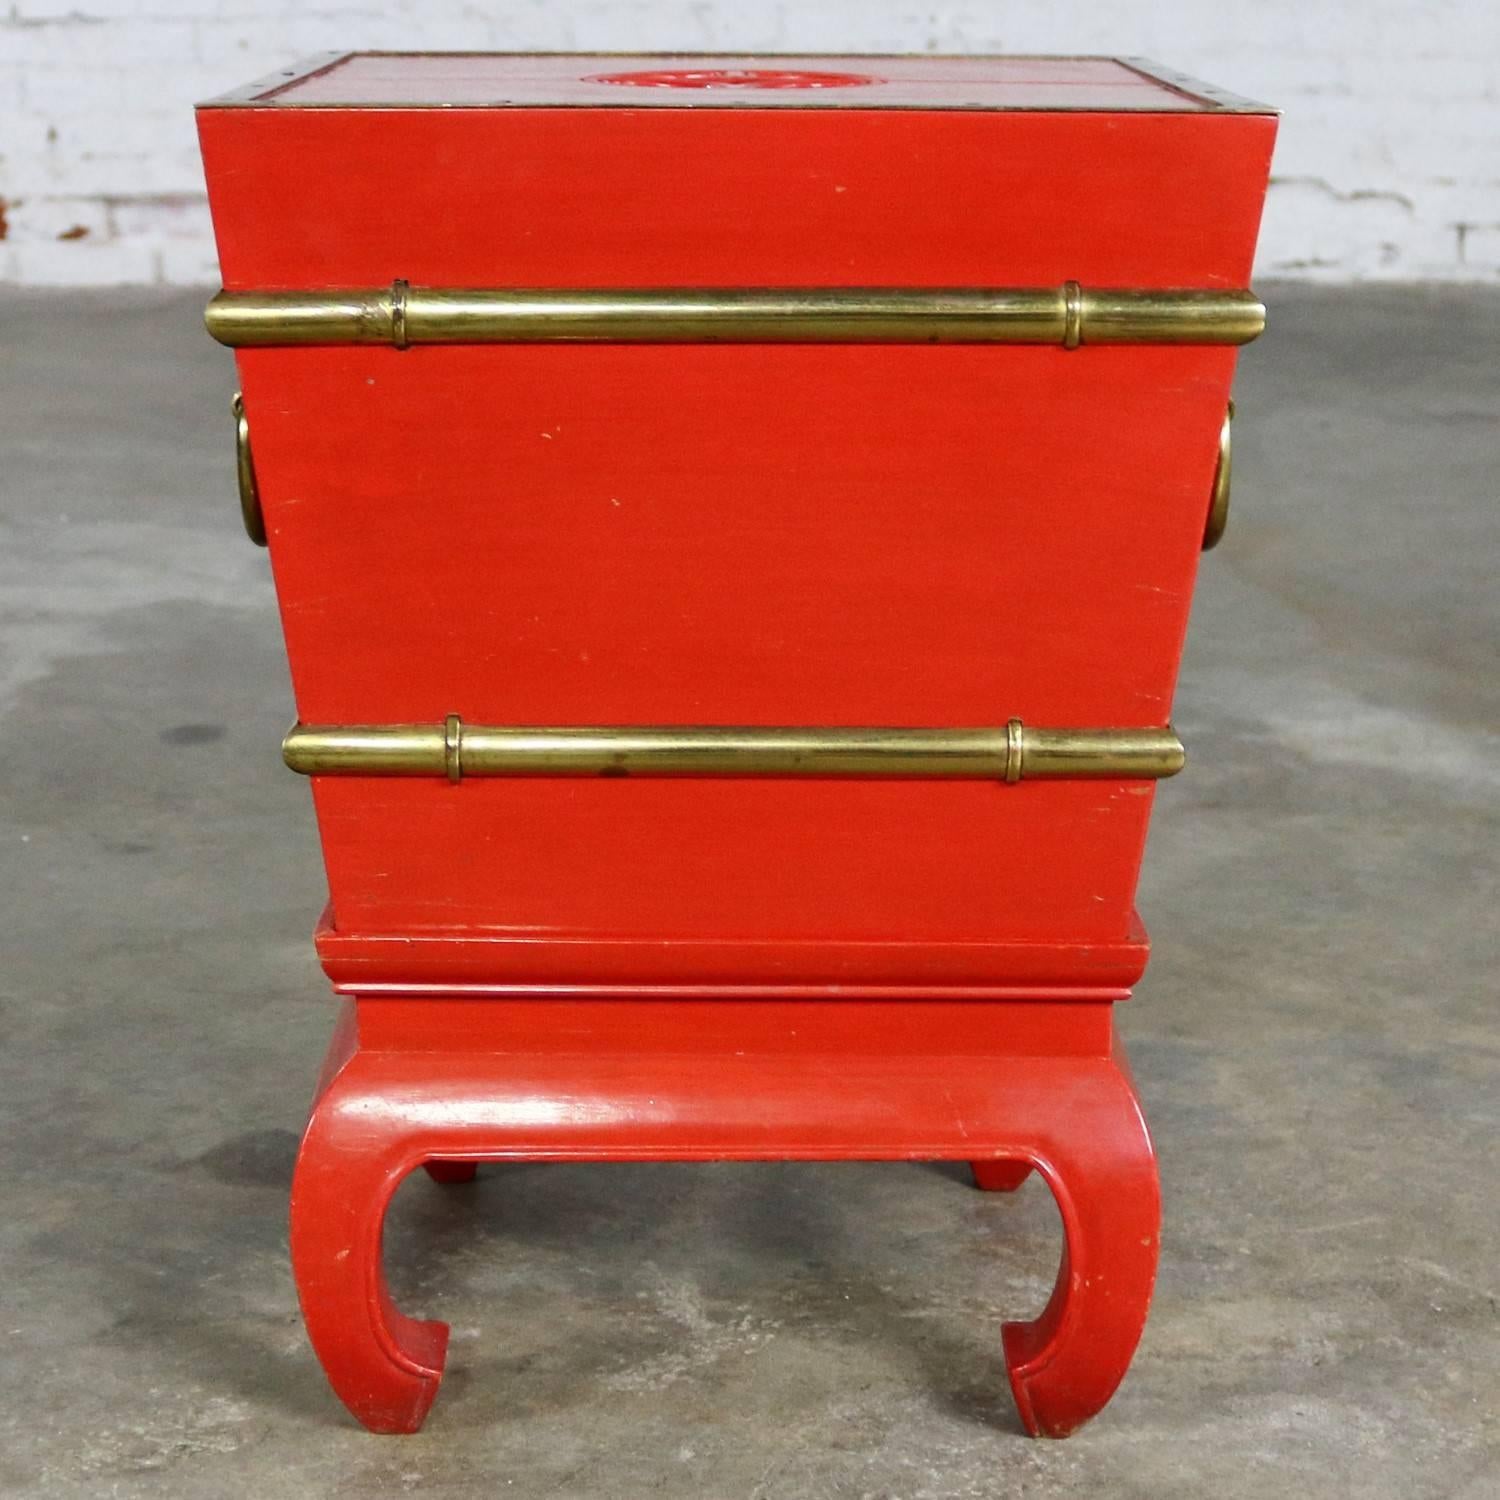 Handsome Chinese red lacquer and brass ice chest, planter, accent table with galvanized insert and lid on hoof foot style removable base. This piece is in wonderful vintage condition with a very nice age patina. One leg has a little more patina than